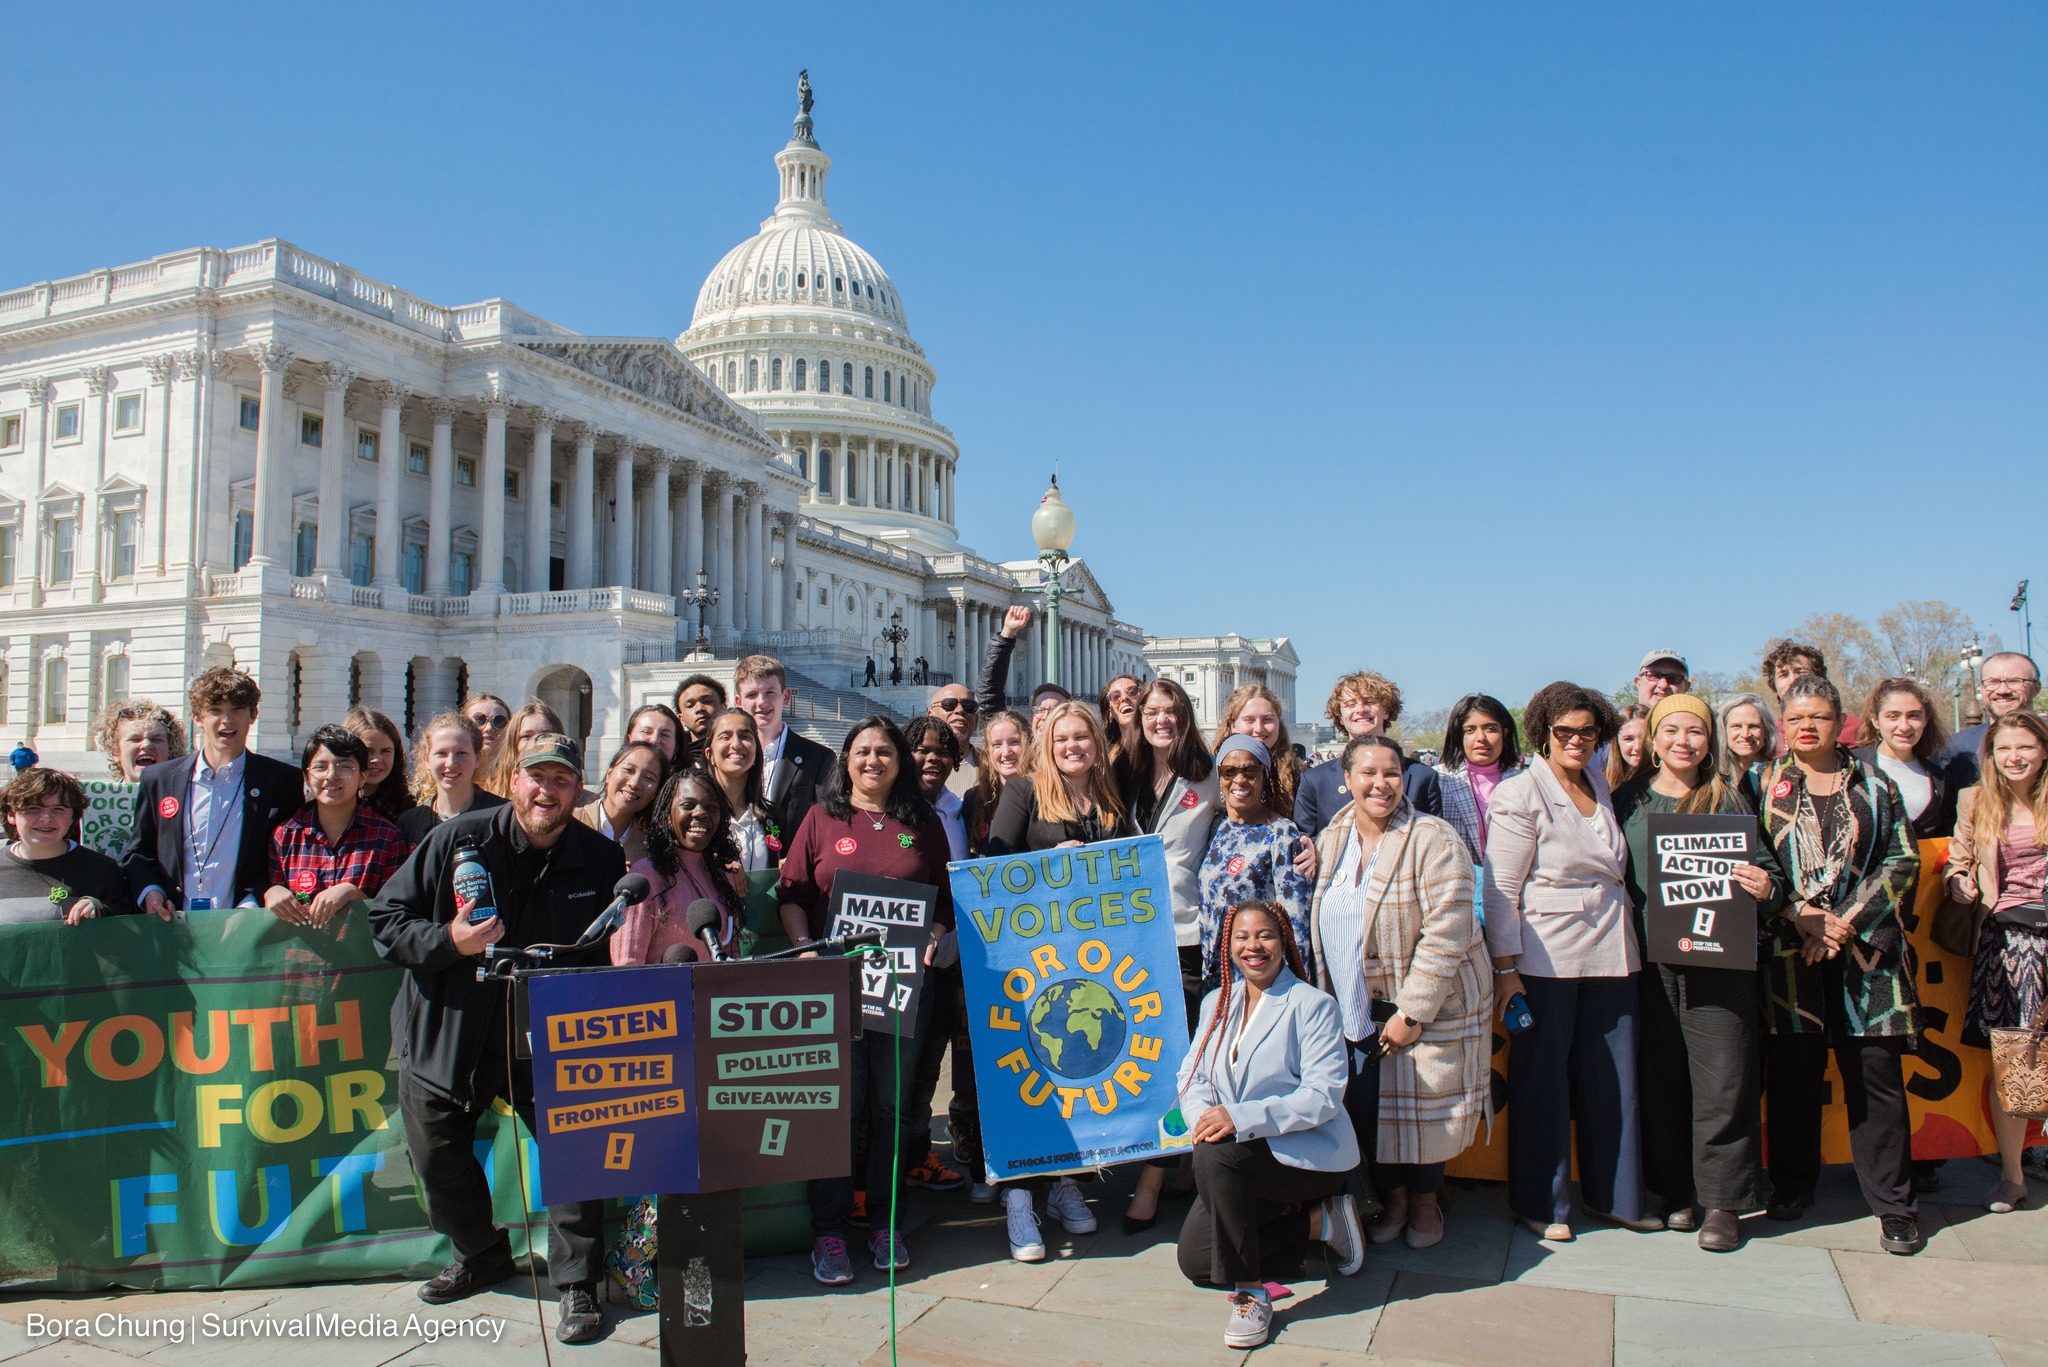 Group of diverse people standing in front of the U.S. Capitol holding signs denouncing fossil fuels and demanding Climate Action.